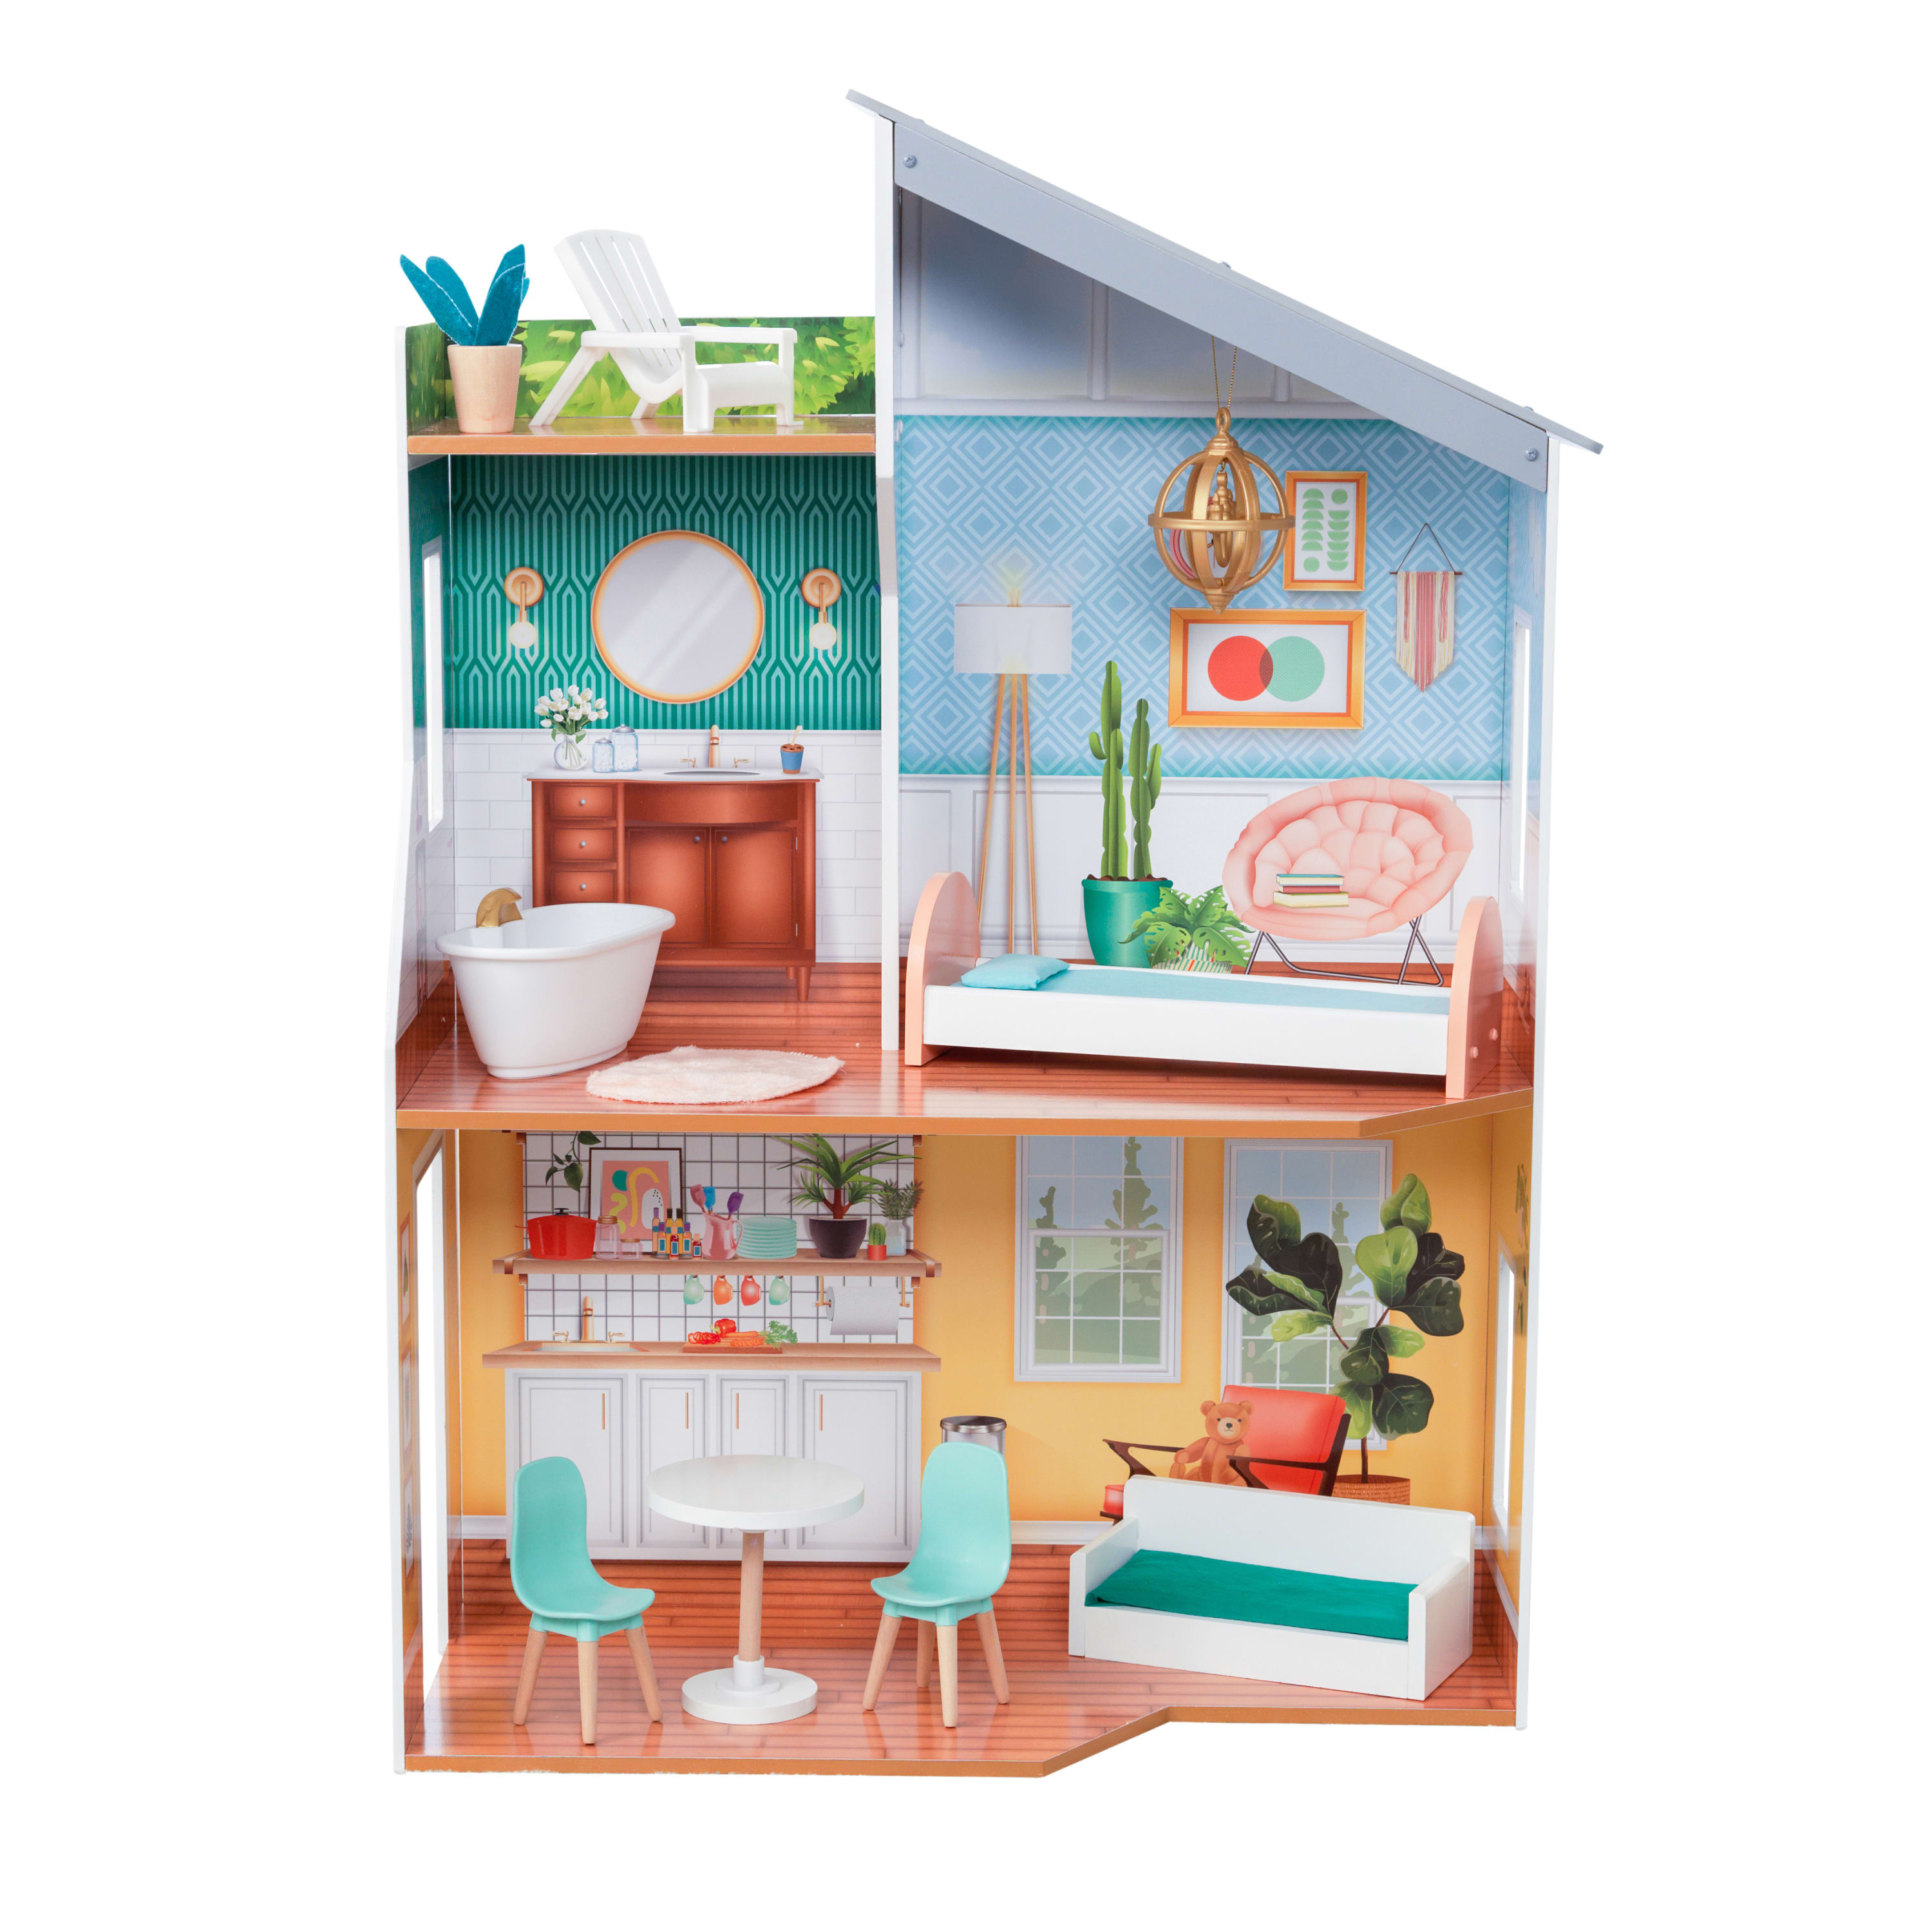 KidKraft Emily Wooden Dollhouse with 10 Accessories Included - image 1 of 8